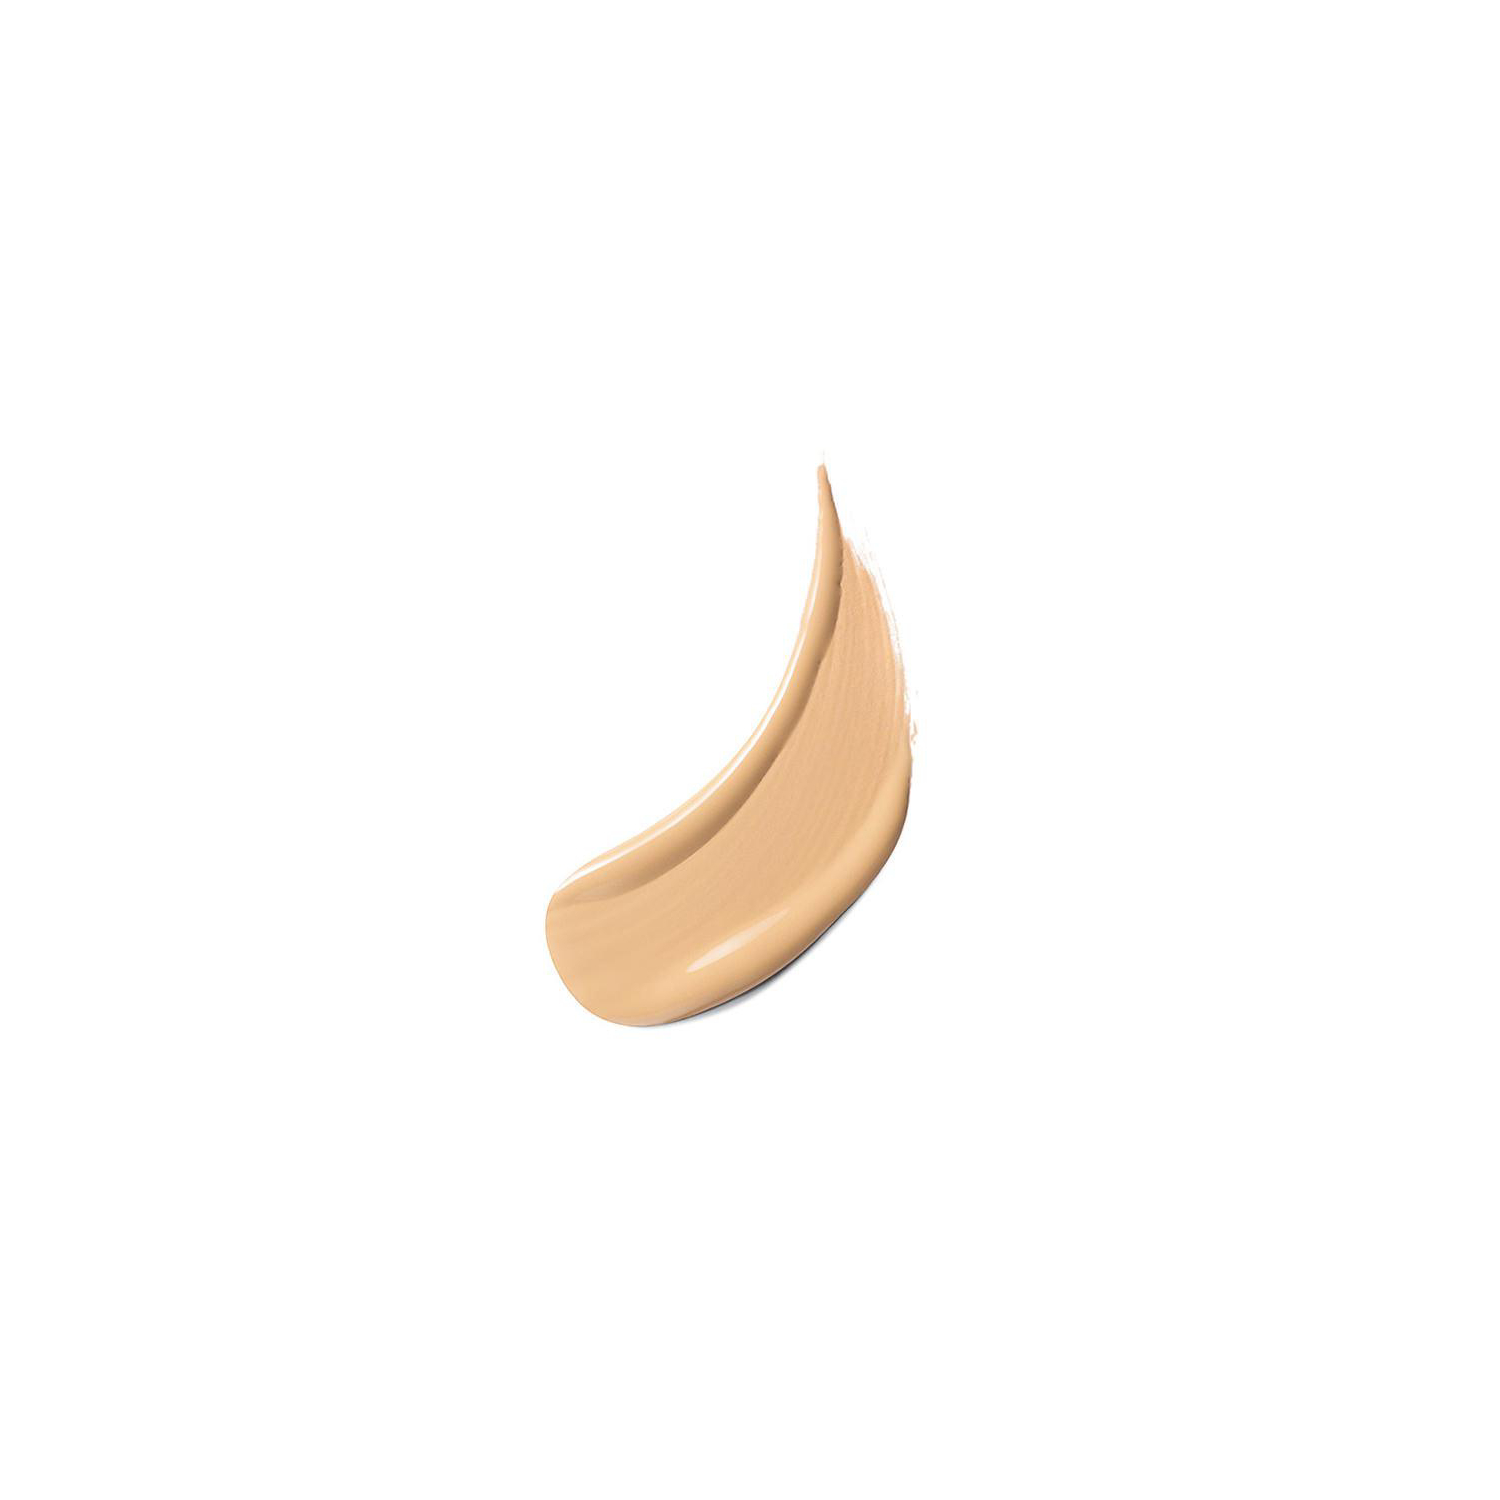 Stay-in-Place Flawless Wear Concealer